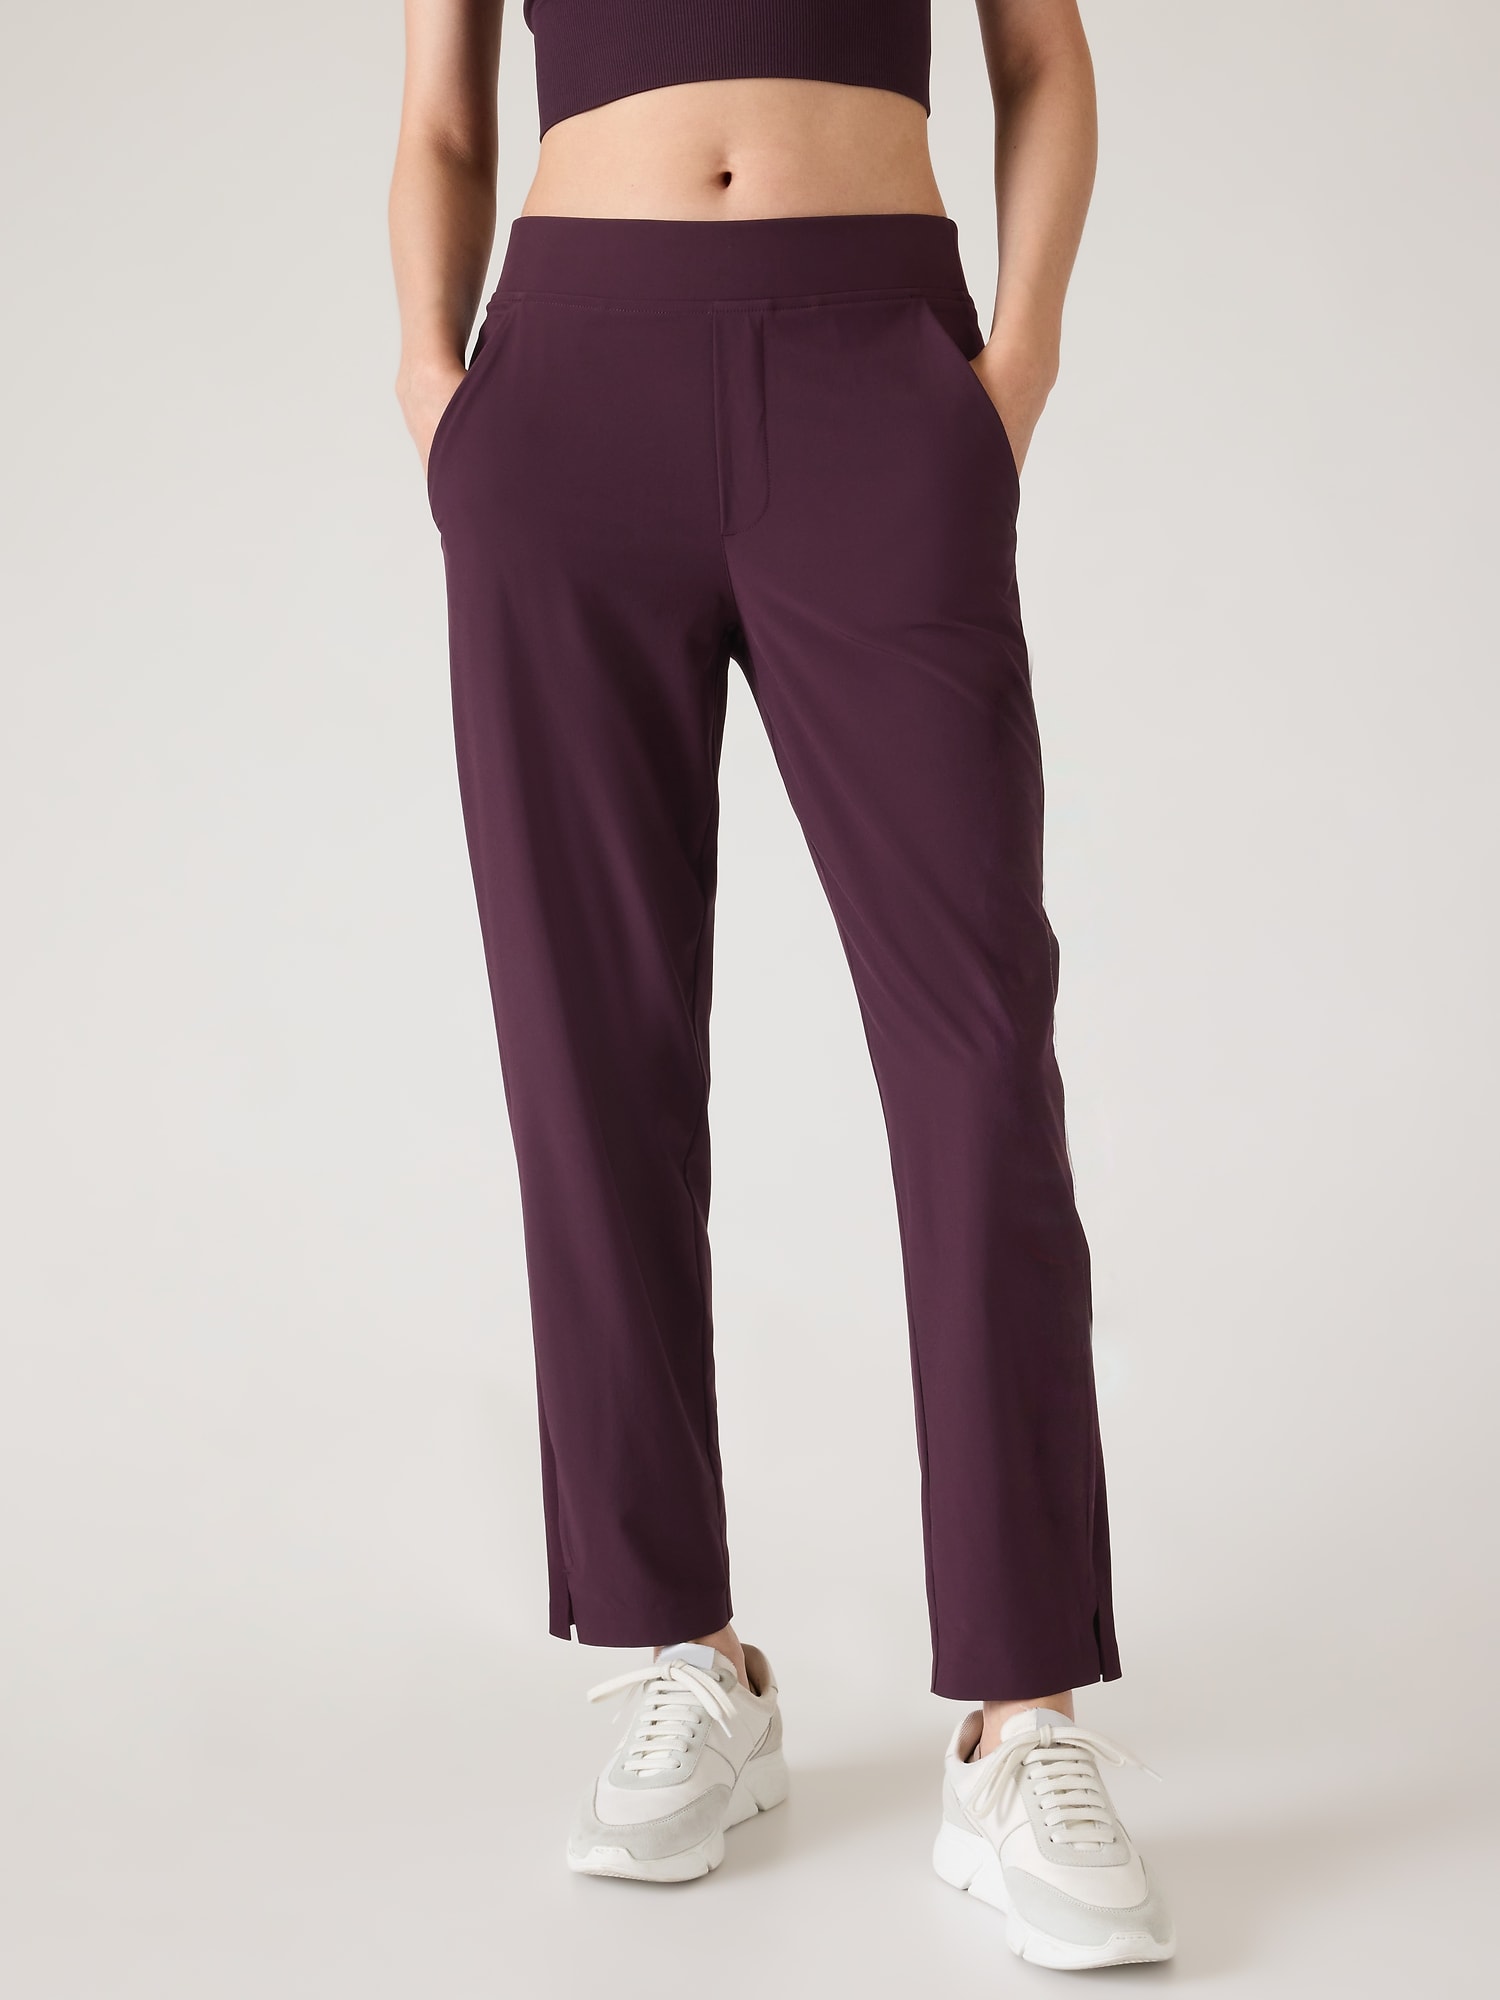 Pants Ankle By Athleta Size: S